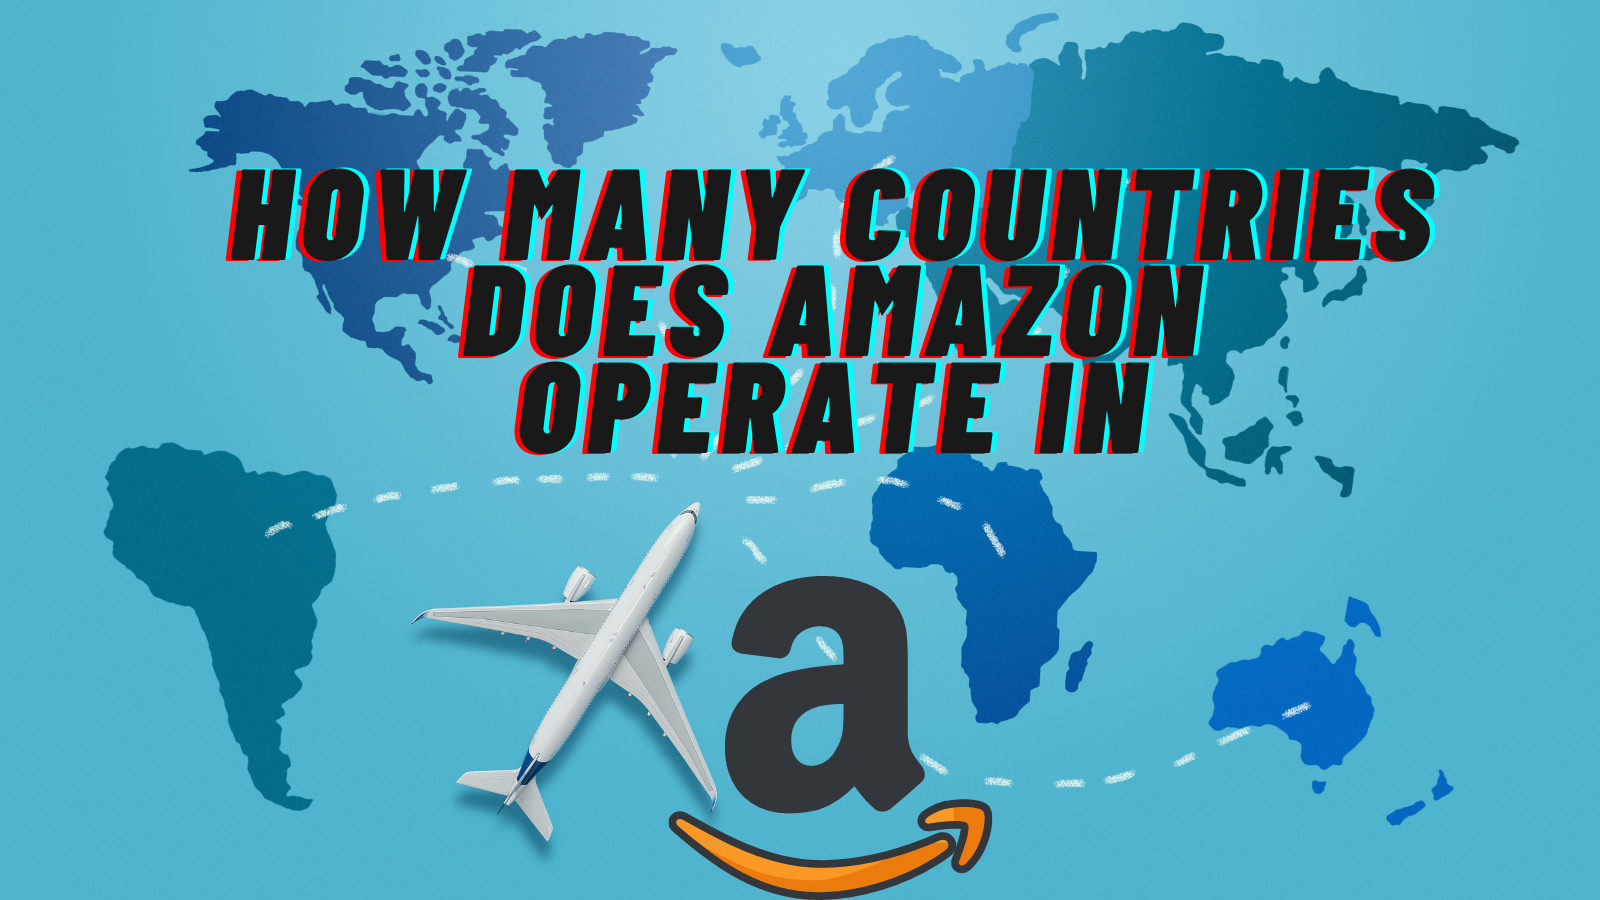 How Many Countries Does Amazon Operate In? (The Answer Might Surprise You)